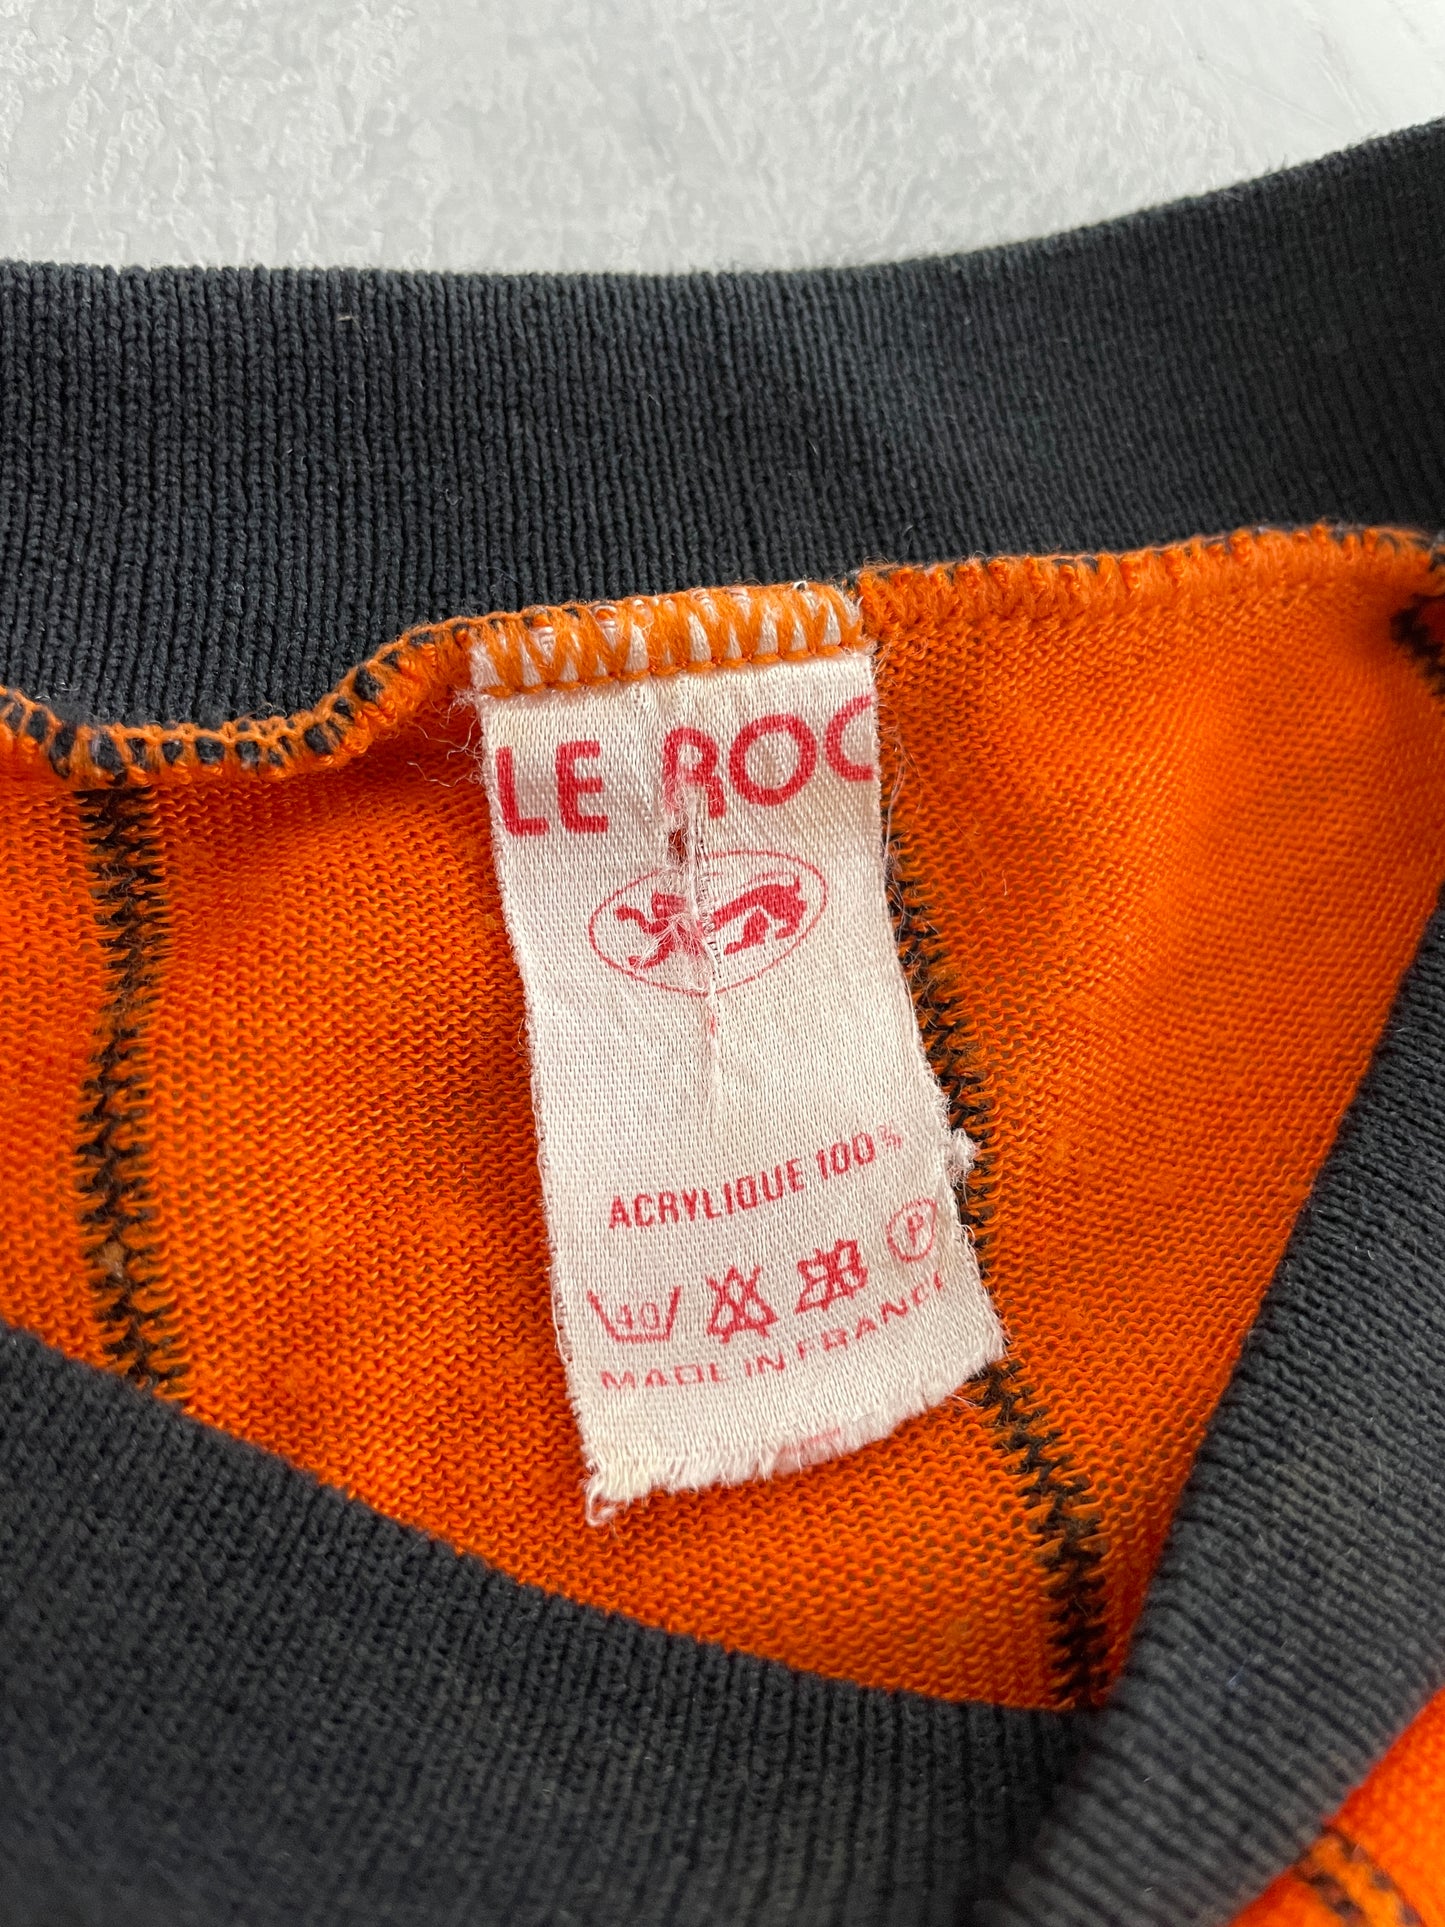 70's French Applimo Jersey [M/L]